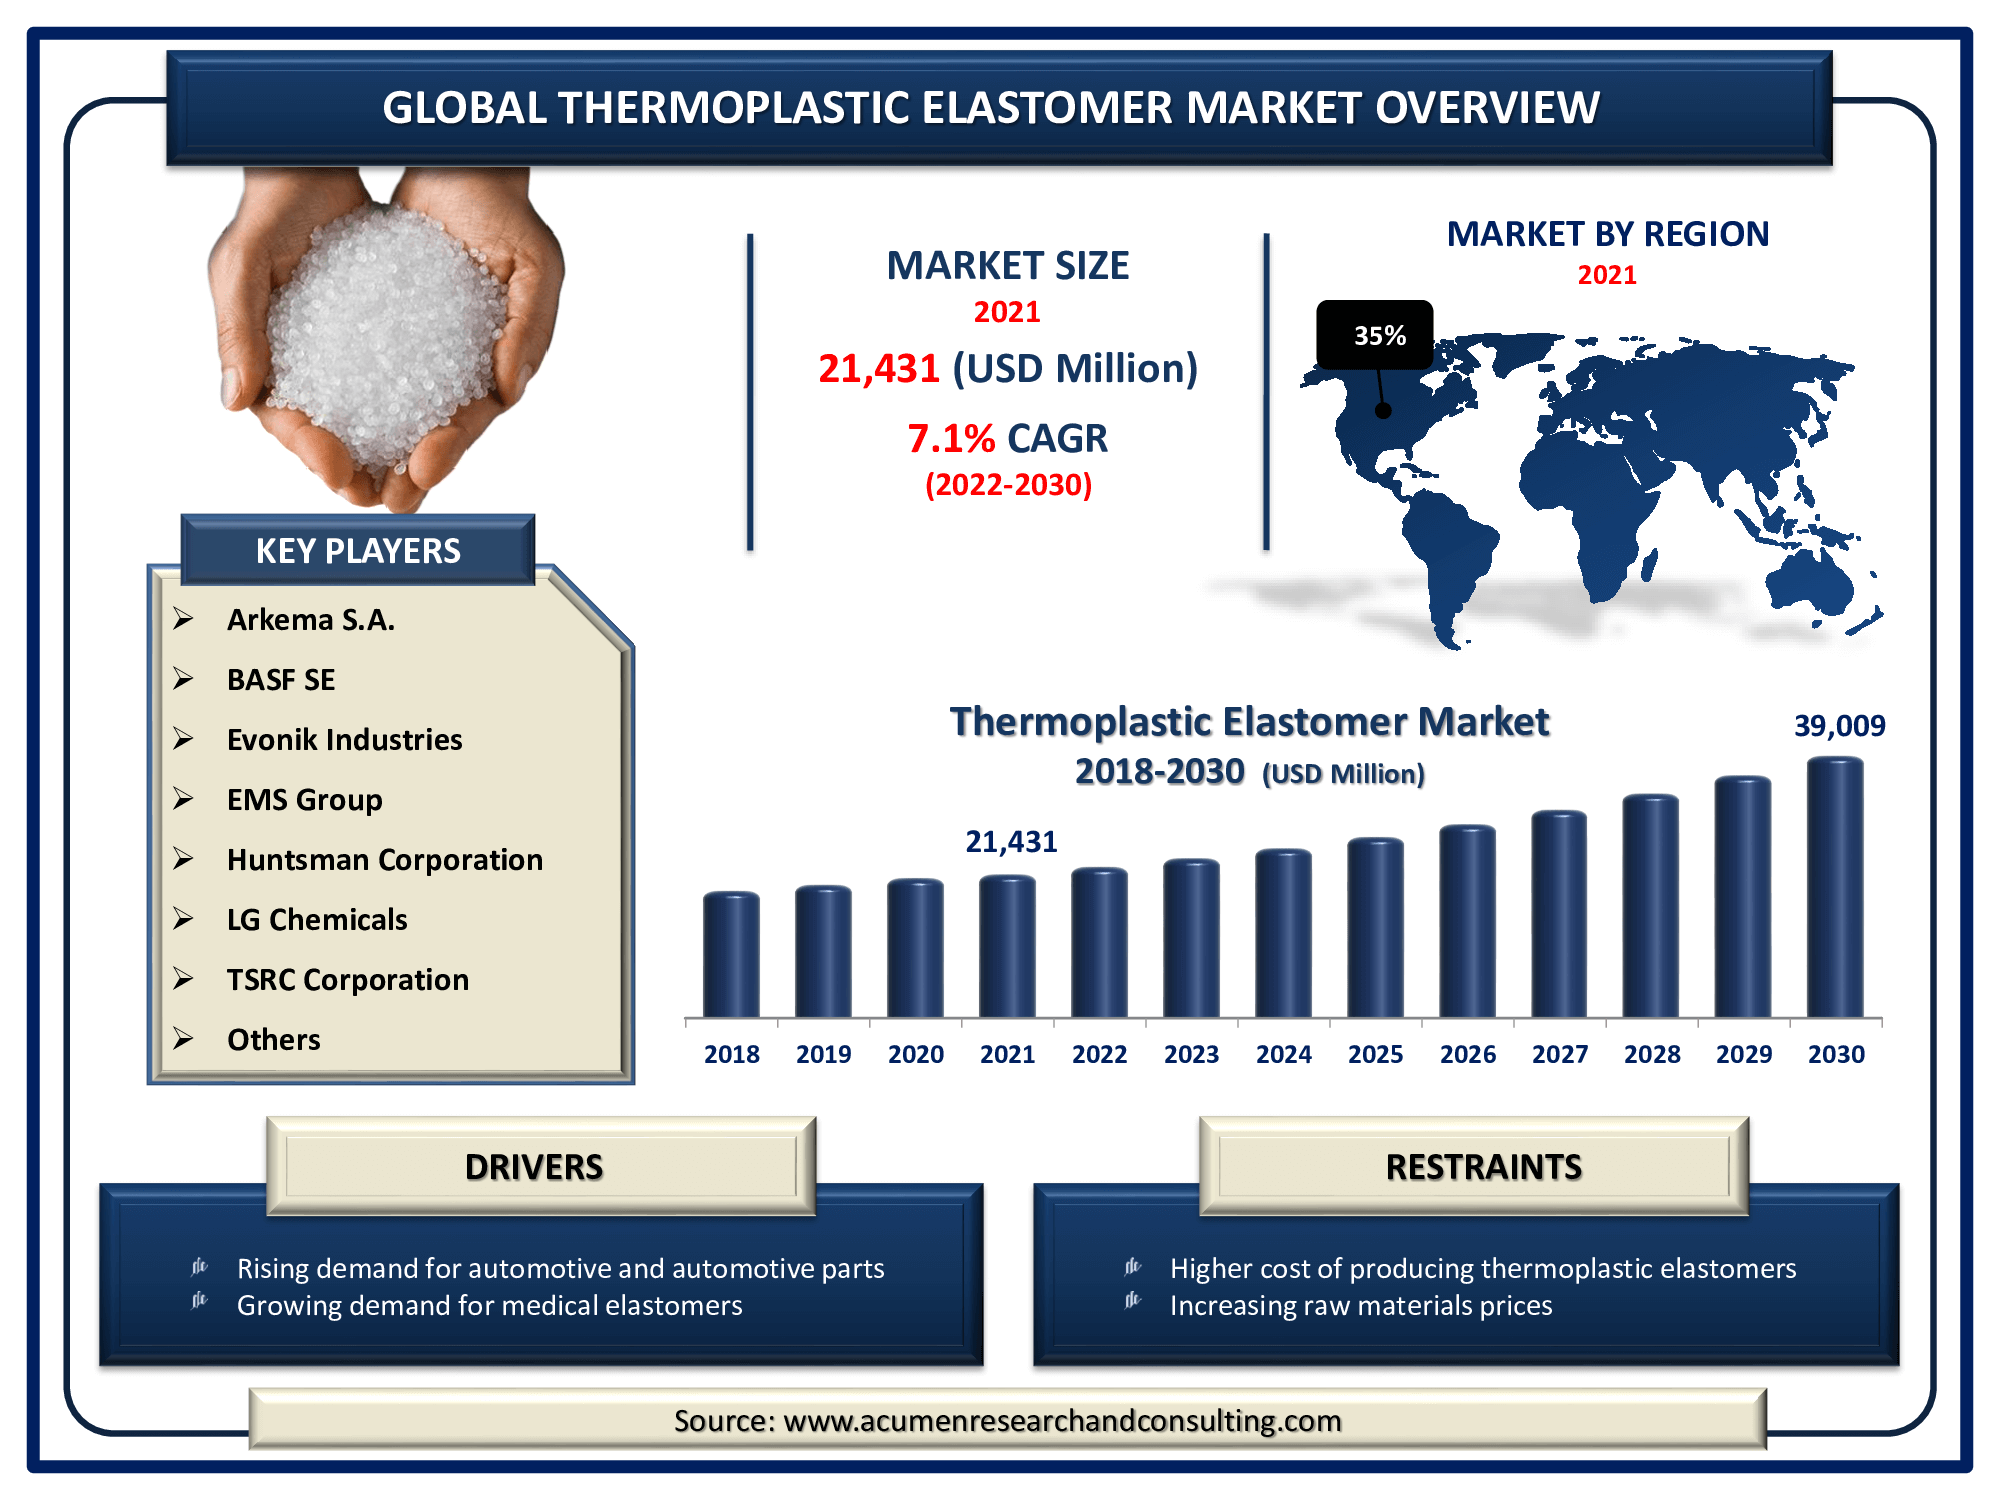 The Global Thermoplastic Elastomer Market Size was valued at USD 21,431 Million in 2021 and is predicted to be worth USD 39,009 Million By 2030, with a CAGR of 7.1% from 2022 to 2030